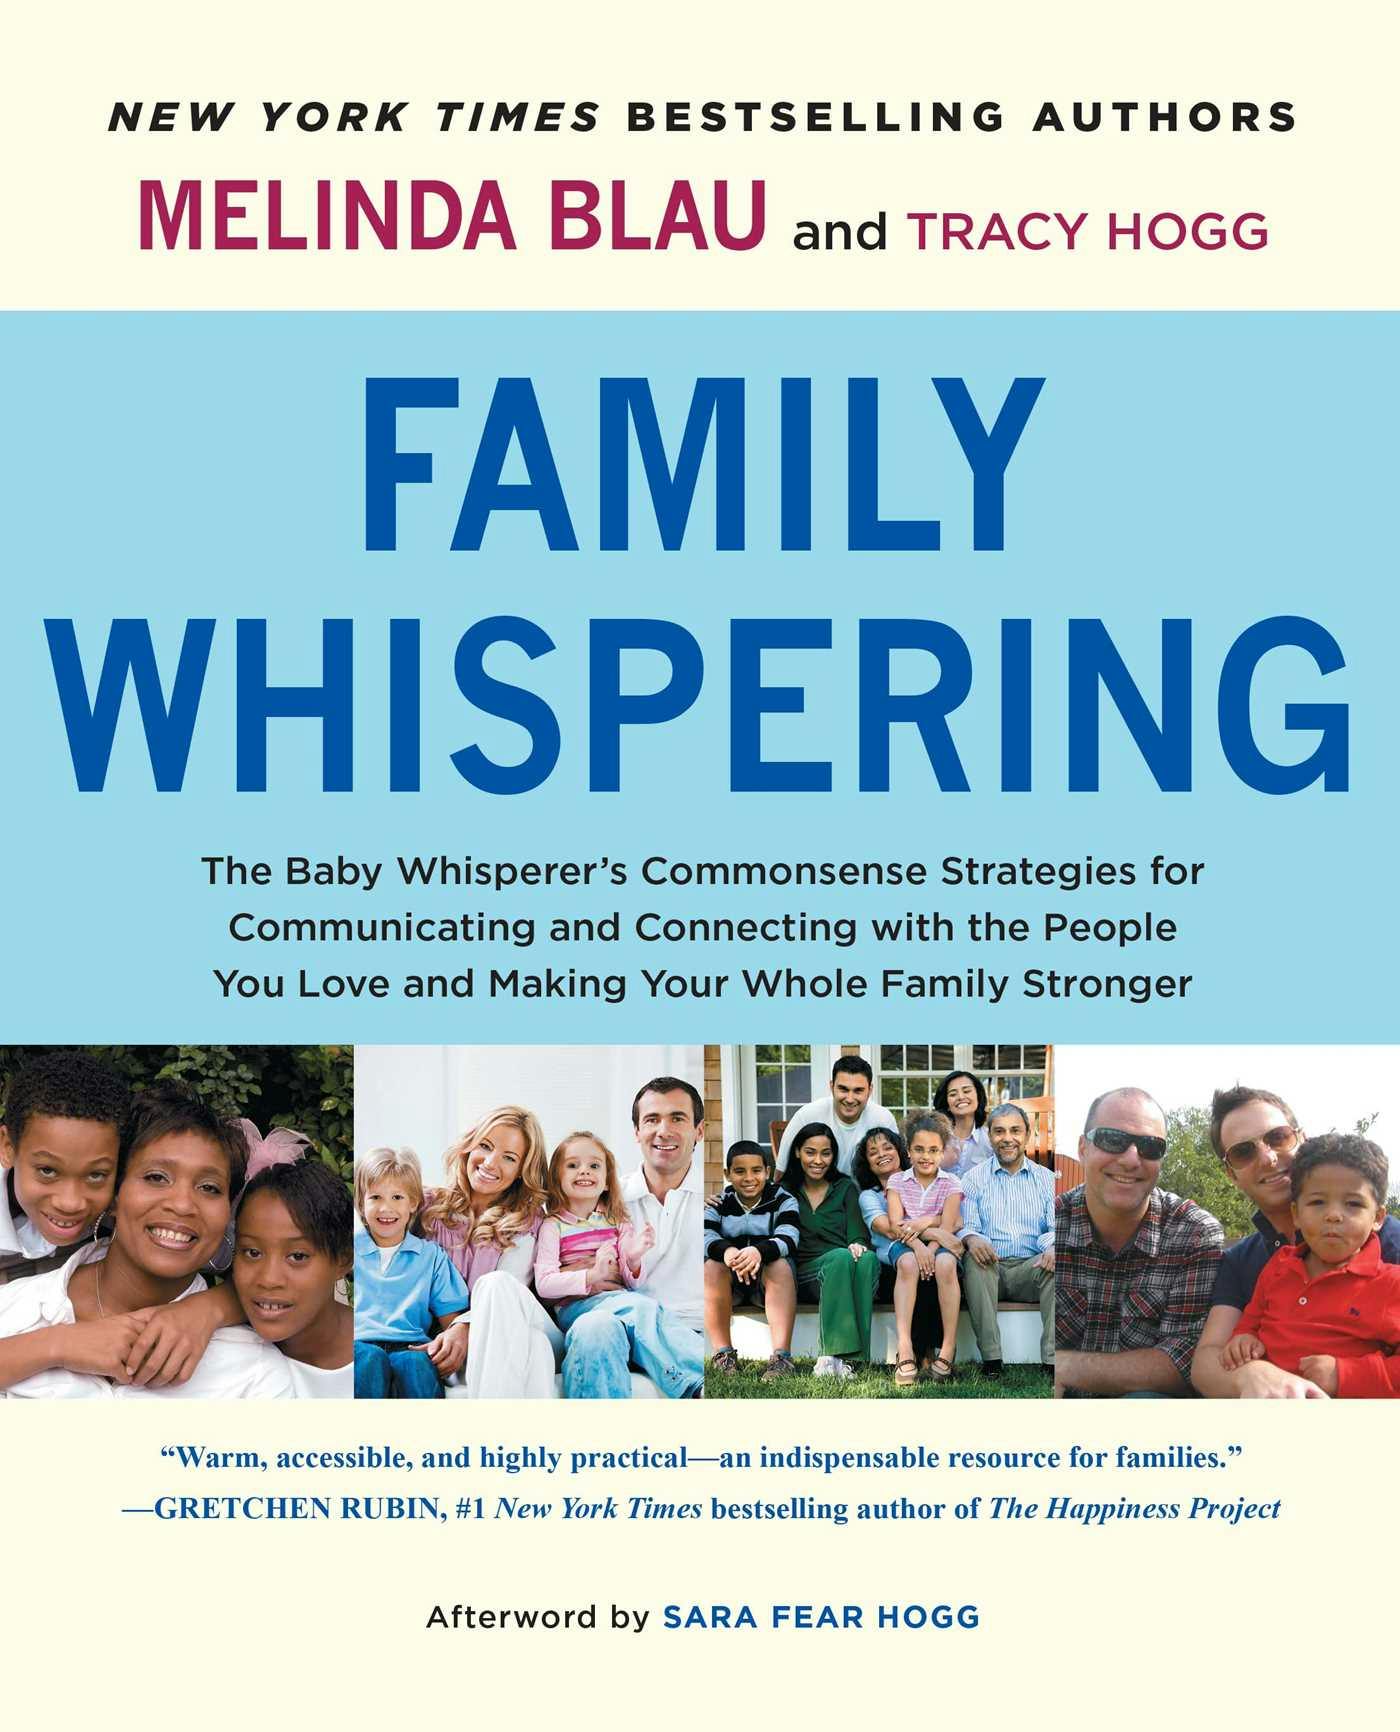 Family Whispering: The Baby Whisperer's Commonsense Strategies for Communicating and Connecting with the People You Love and Making Your Whole Family Stronger - undefined